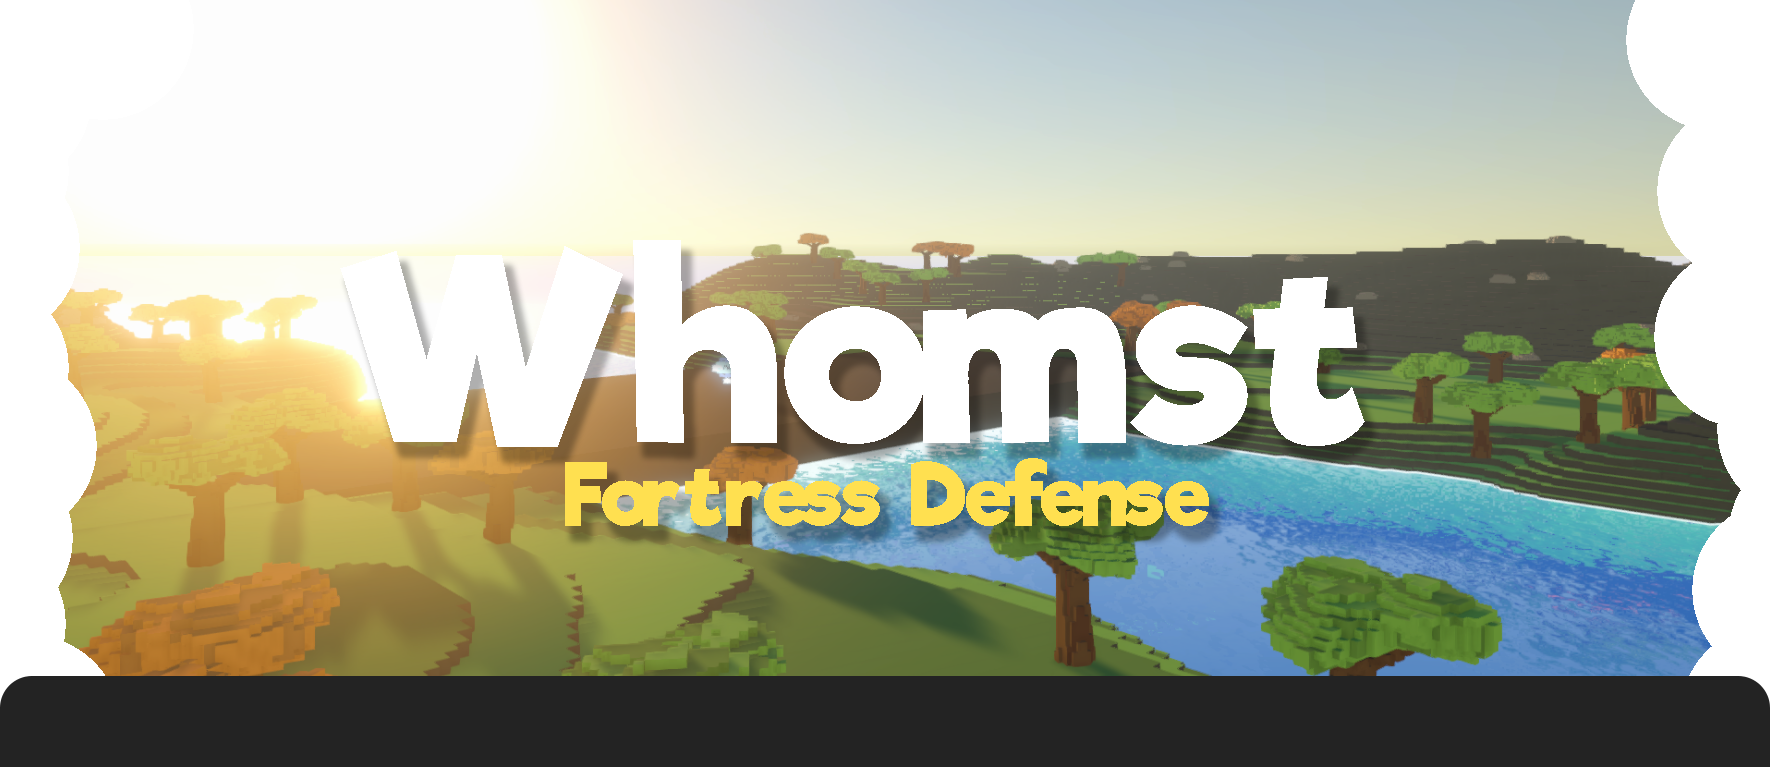 Whomst Fortress Defense